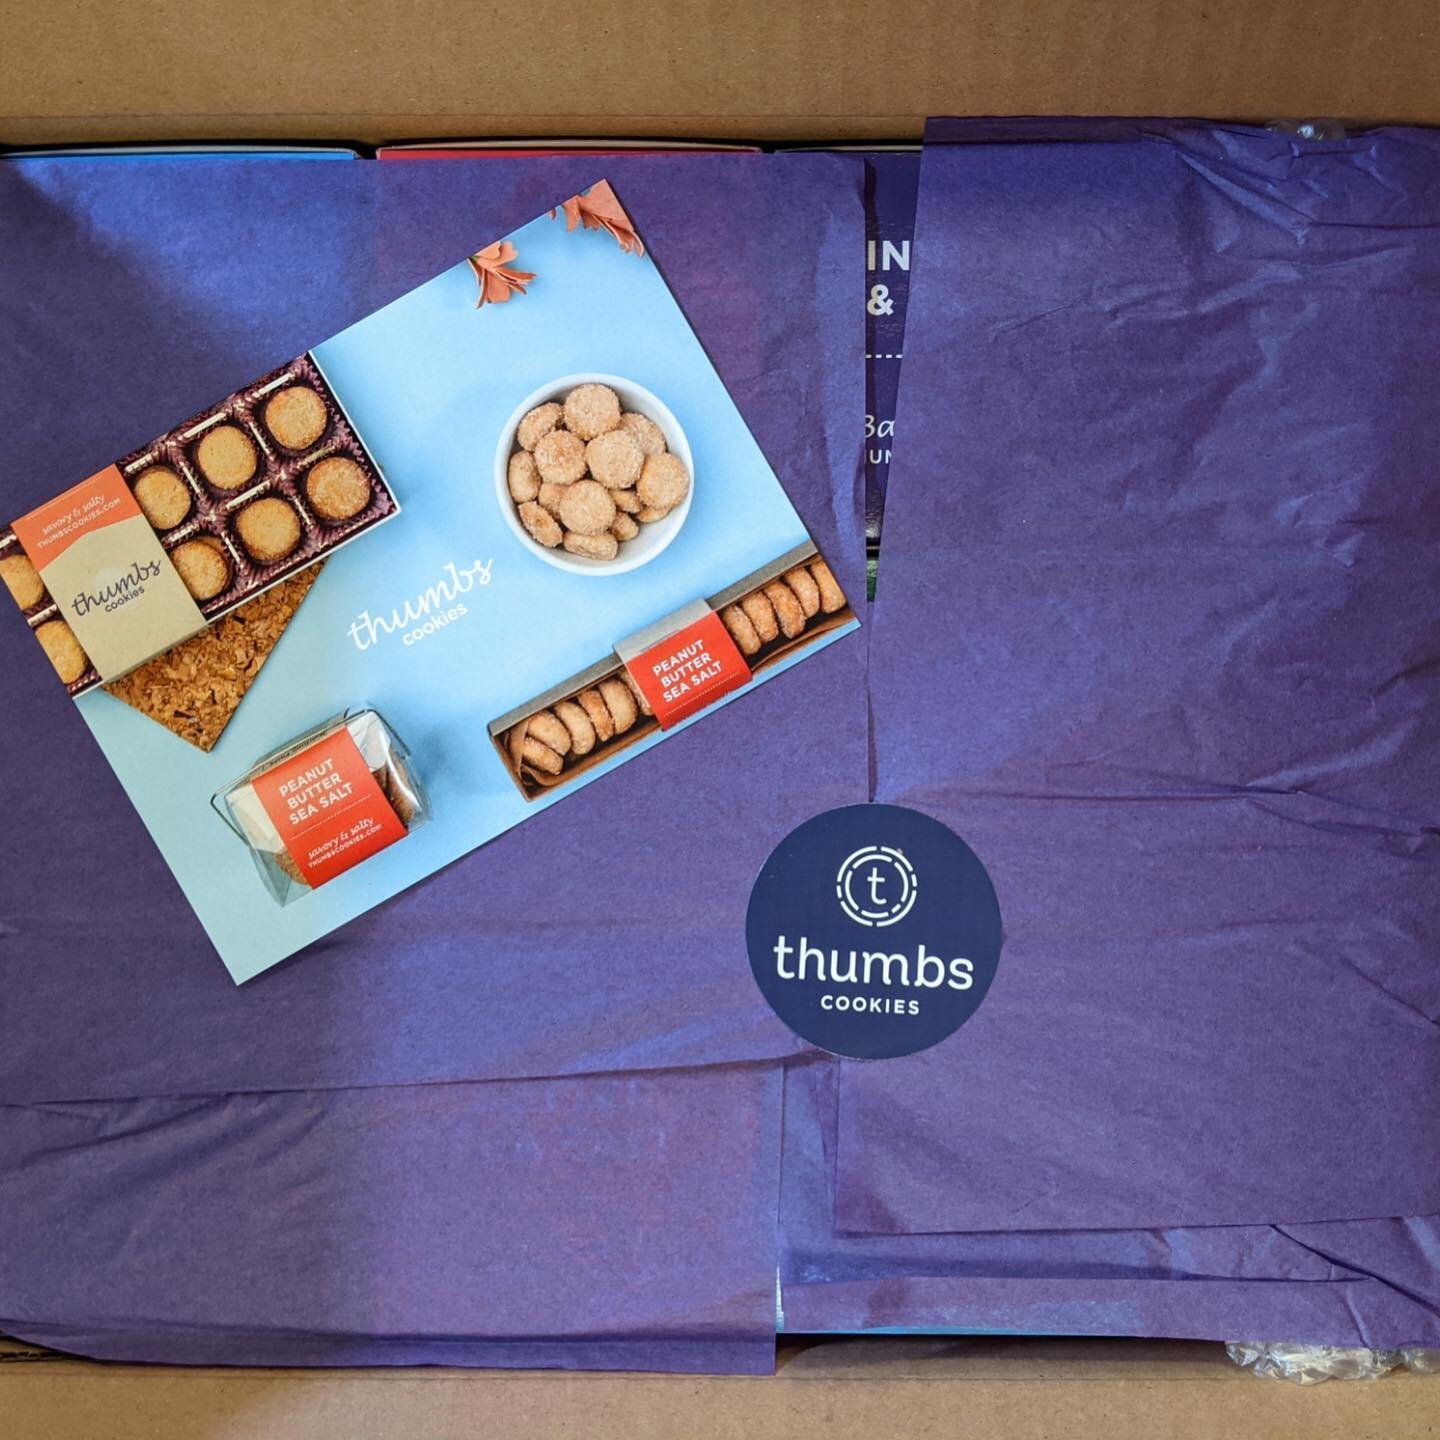 Every caregiving team deserves a huge thank you! One way to do that is by visiting My PowerPak's Marketplace and sending a care package from @thumbscookies &mdash;their delicious treats are the perfect gift to show caregivers how much you appreciate 